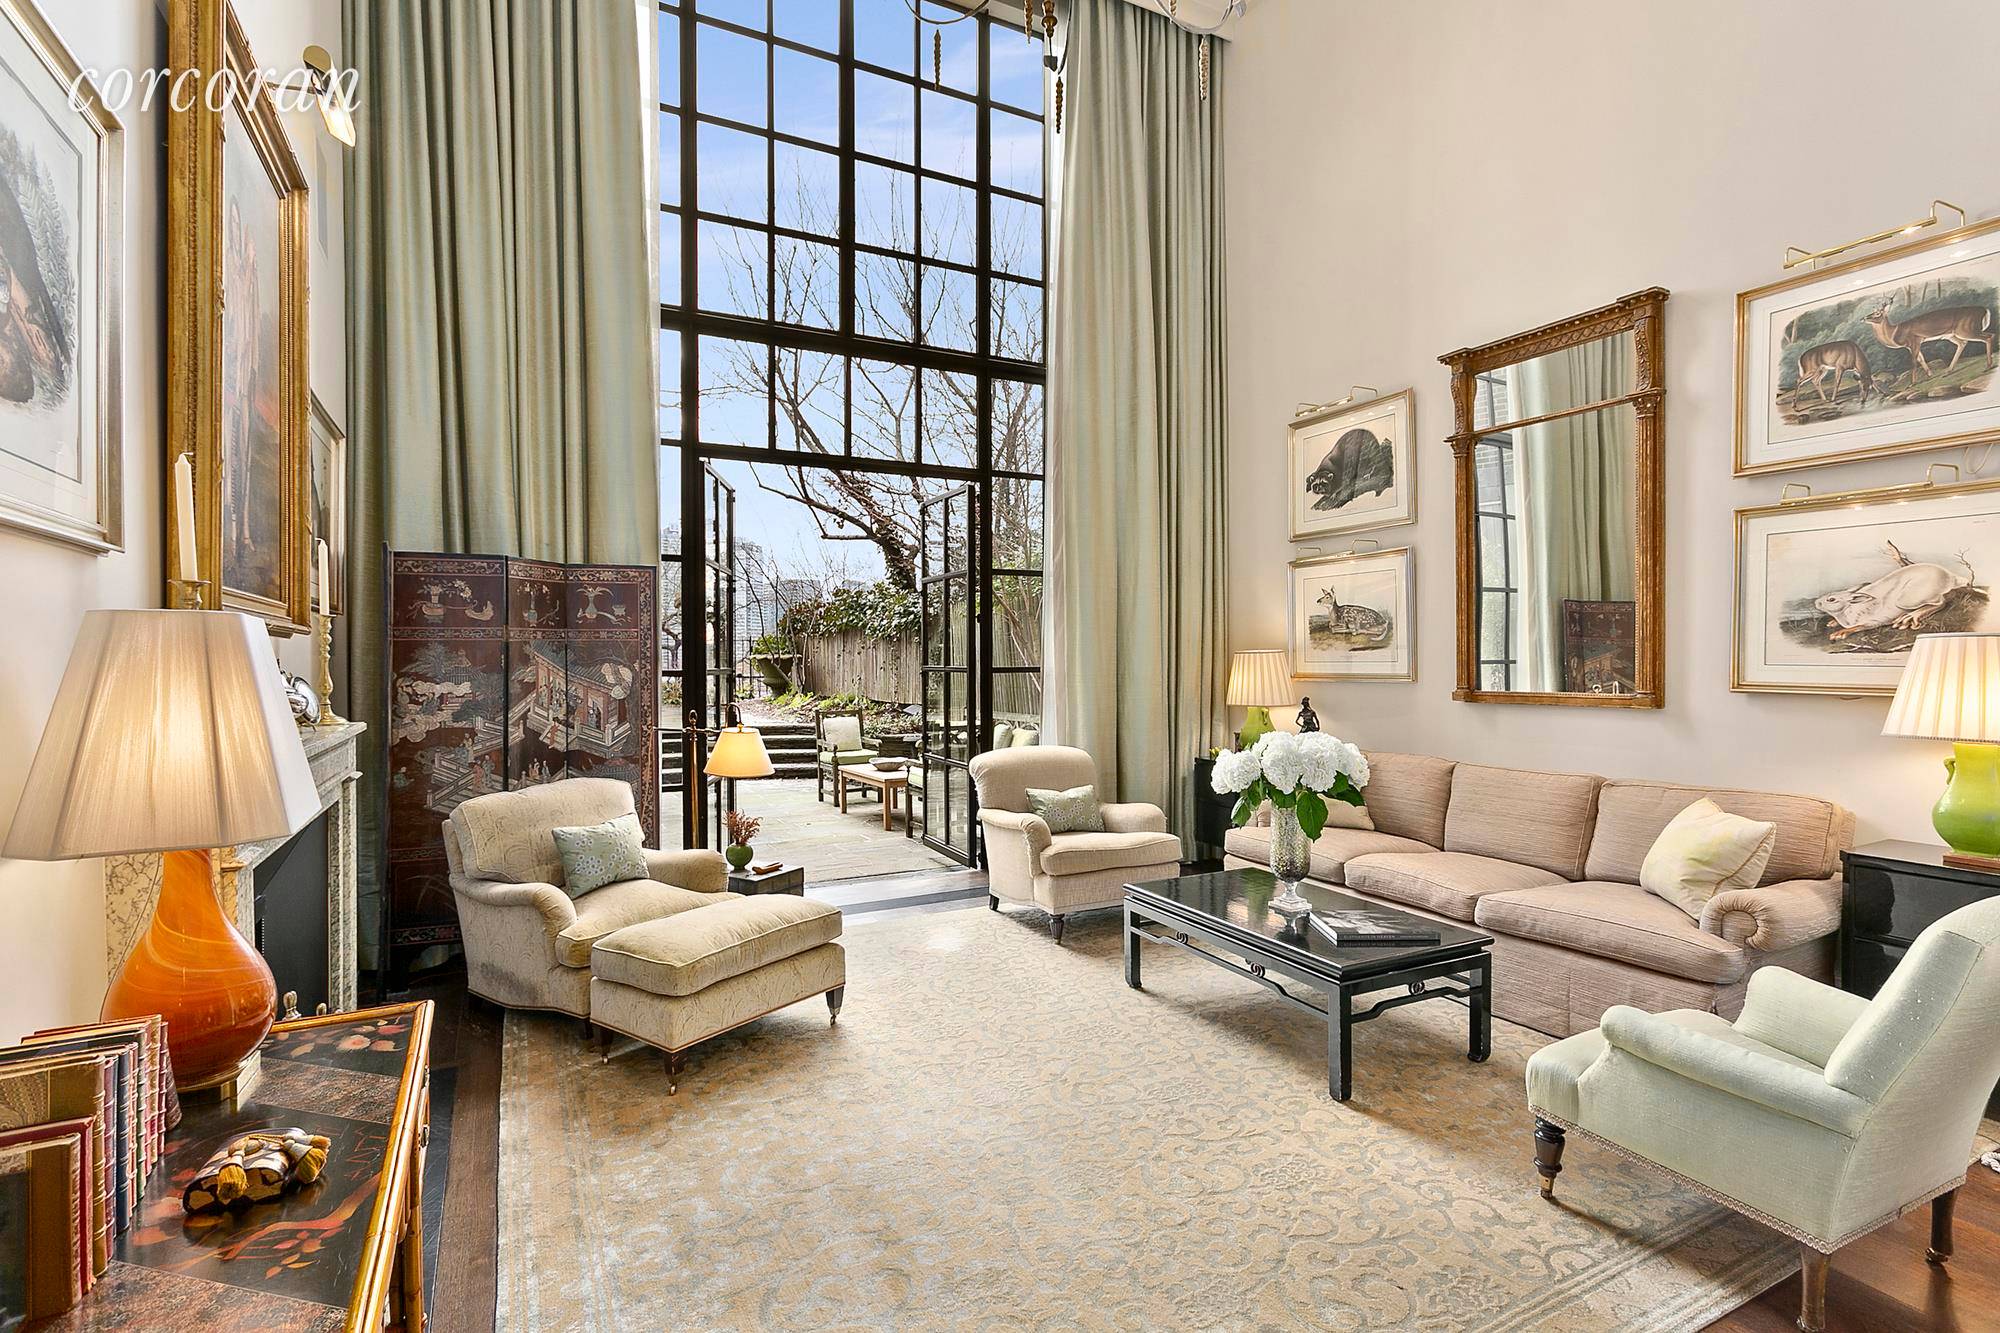 This one of a kind, ultra dramatic, mint condition, quadruplex Manhattan townhouse apartment is located on prestigious Beekman Place and offers the ultimate in privacy and tranquility.